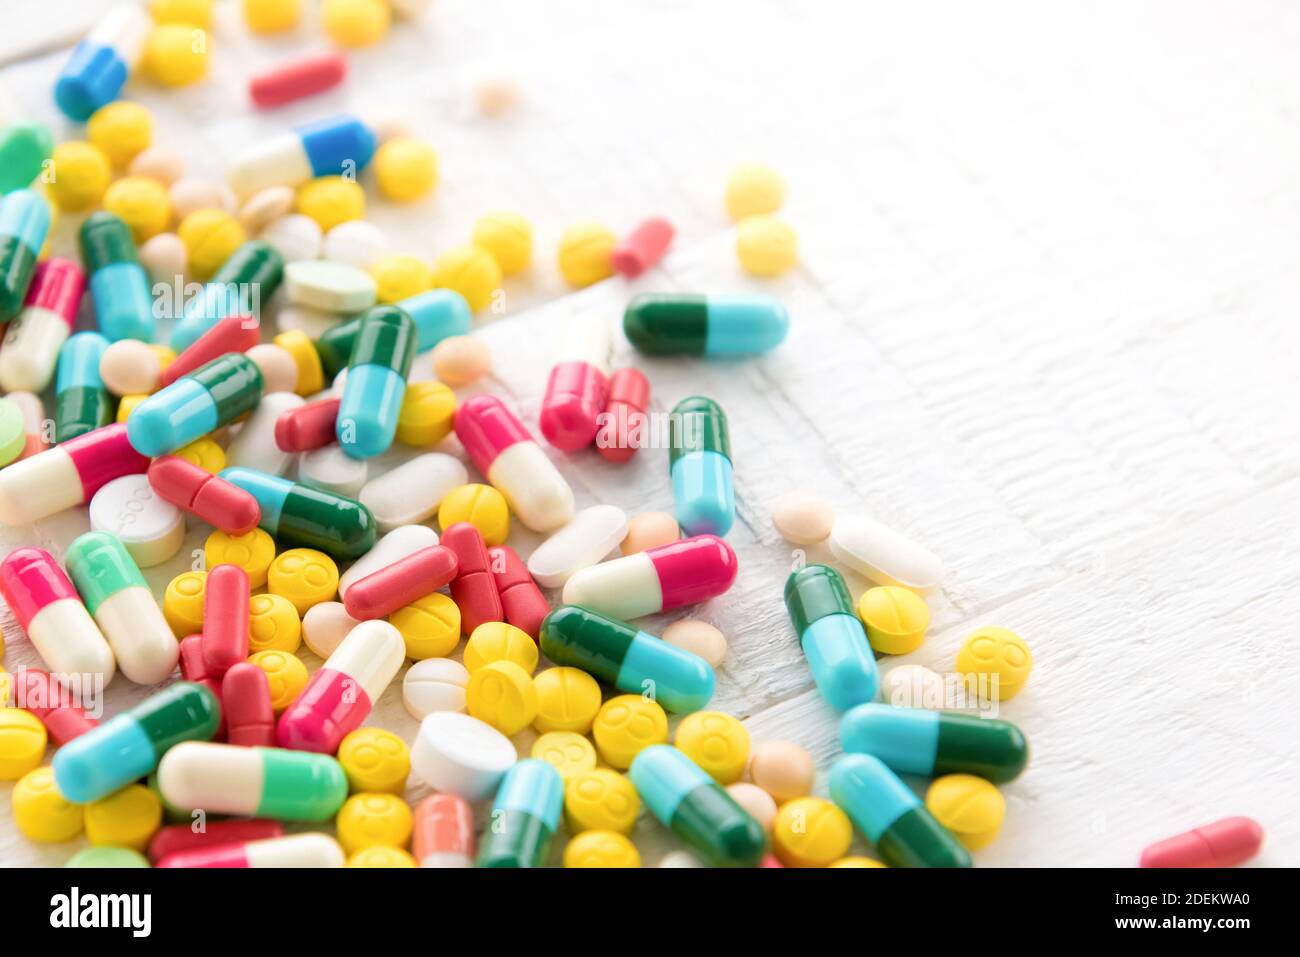 Mixed colorful pharmaceutical drugs and medicine in pill and capsule form on white table Stock Photo